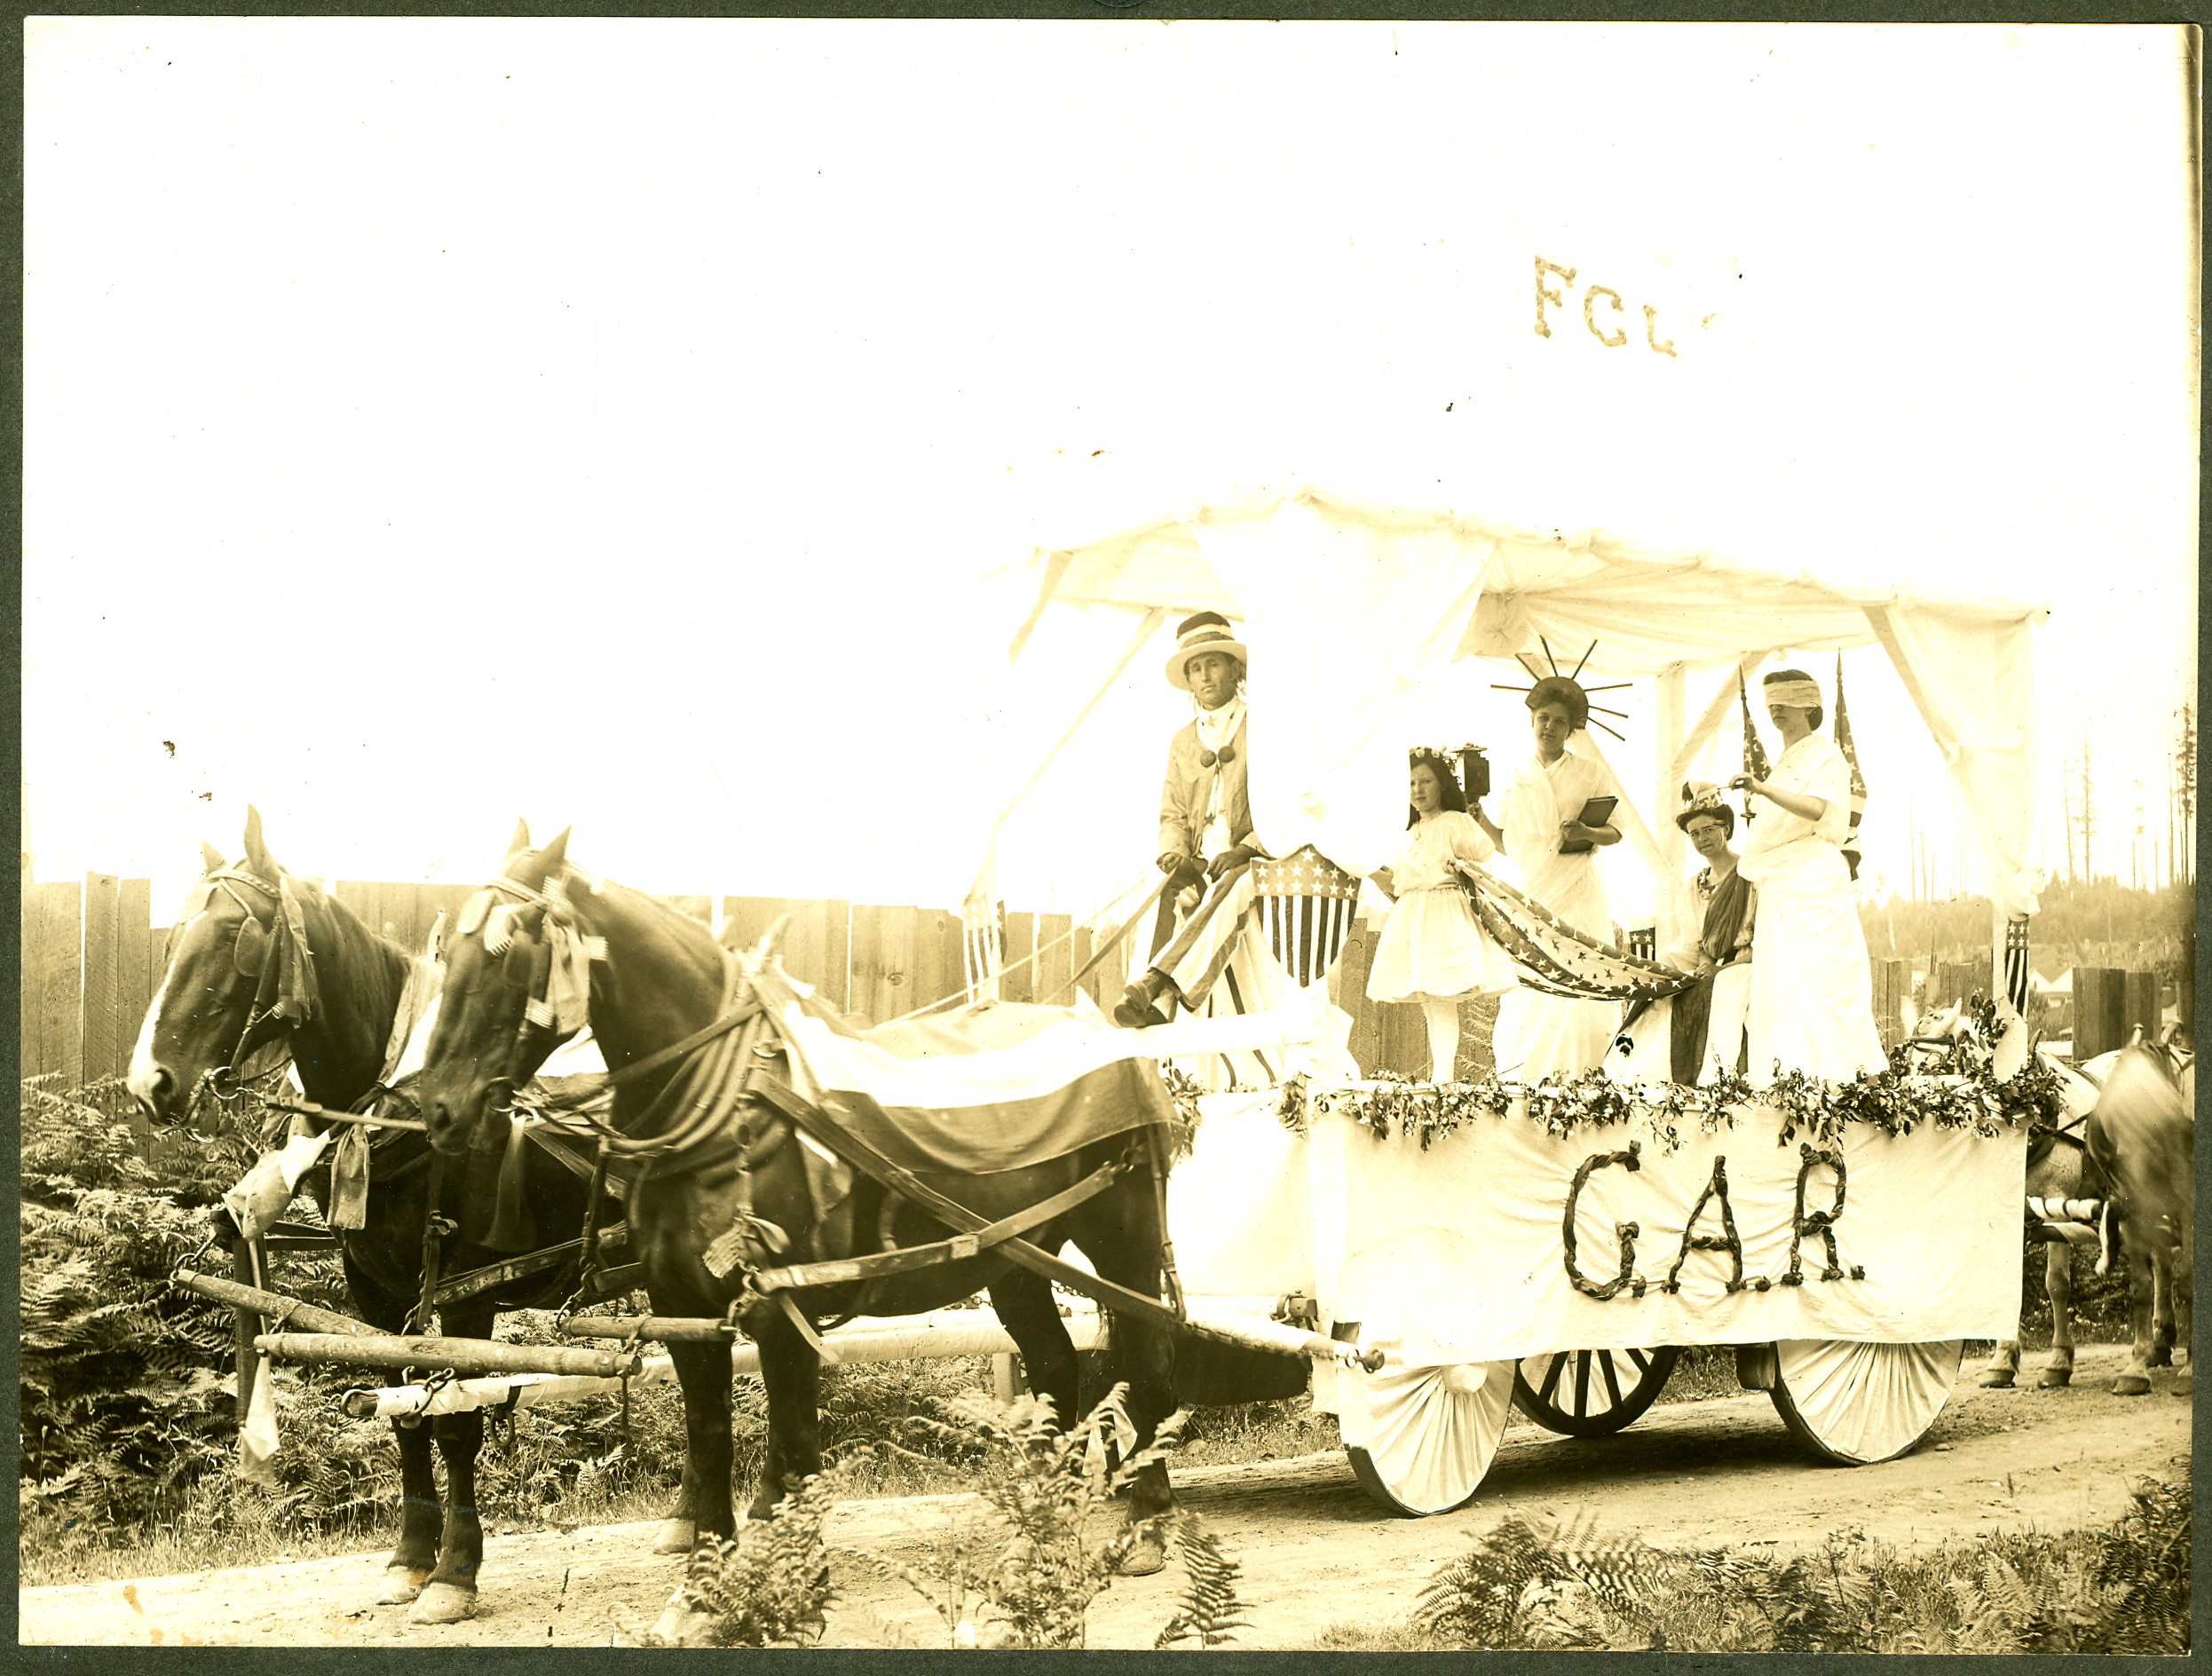 This G.A.R. float was designed by the Women's Relief Corps for the 1908 Bothell 4th of July Parade. Left to right on the float: depicting liberty, justice (blindfolded) and American independence (behind the unidentified driver) are Gladys Hannan, Hannah Staples as Liberty, Alta Elliot and a blindfolded Marie Campbell as Justice. The letters G.A.R. stood for Grand Army of the Republic, a reference to the U.S. Army (the North) during the Civil War. The G.A.R. fraternal organization was a veterans' group and included the Women's Relief Corps, their auxiliary unit. 